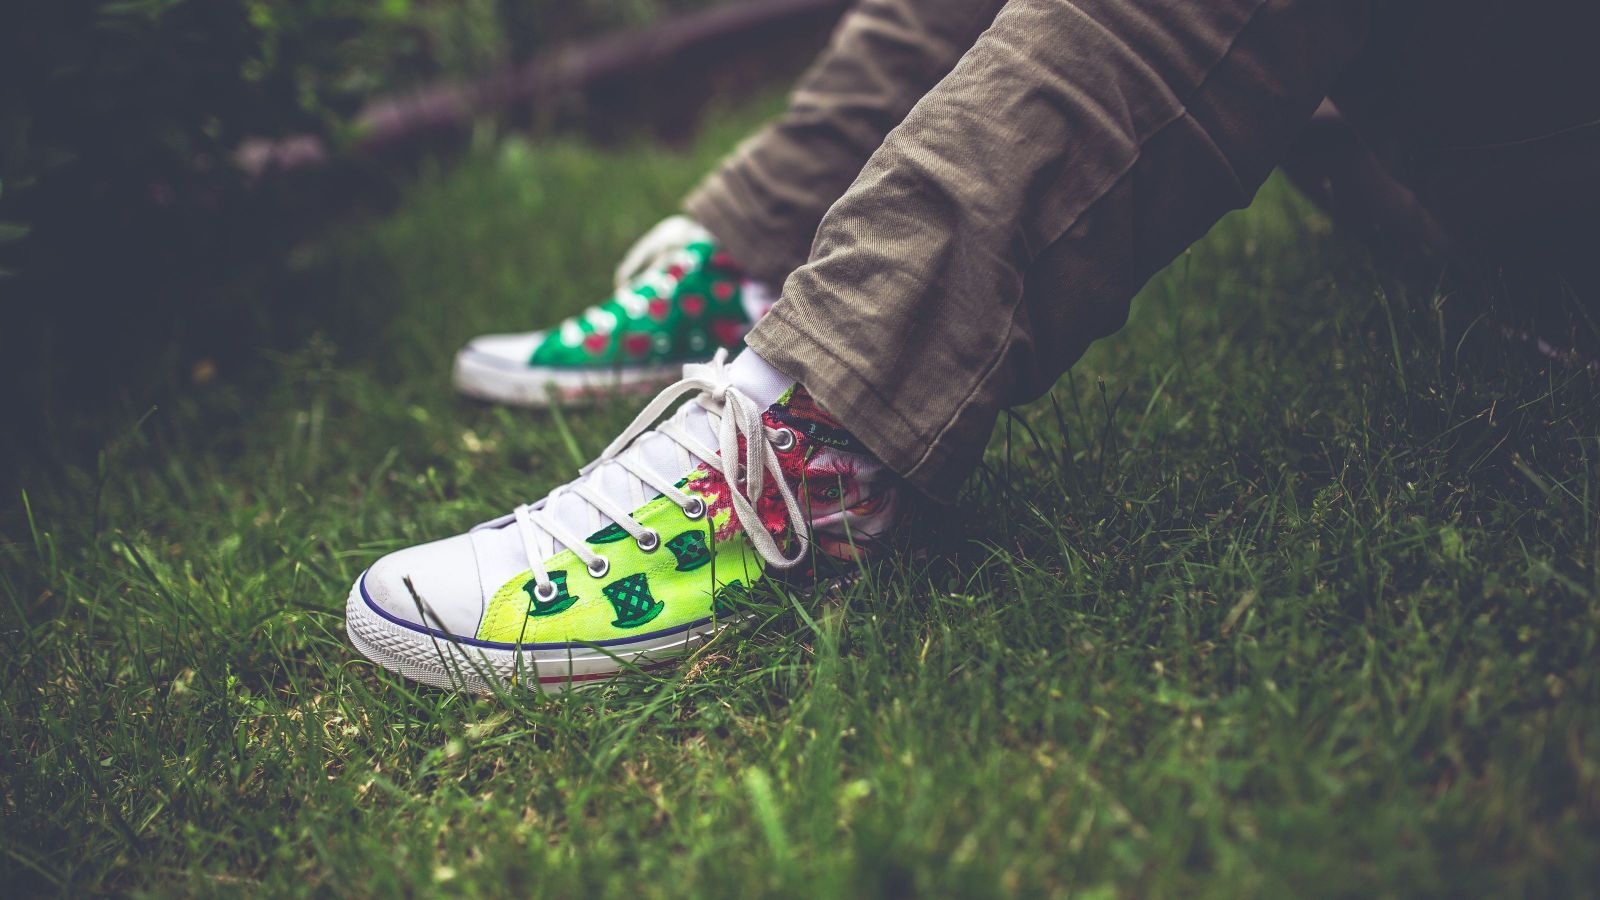 white and green sneakers worn by someone sitting with their feet on the lawn, close up of the feet